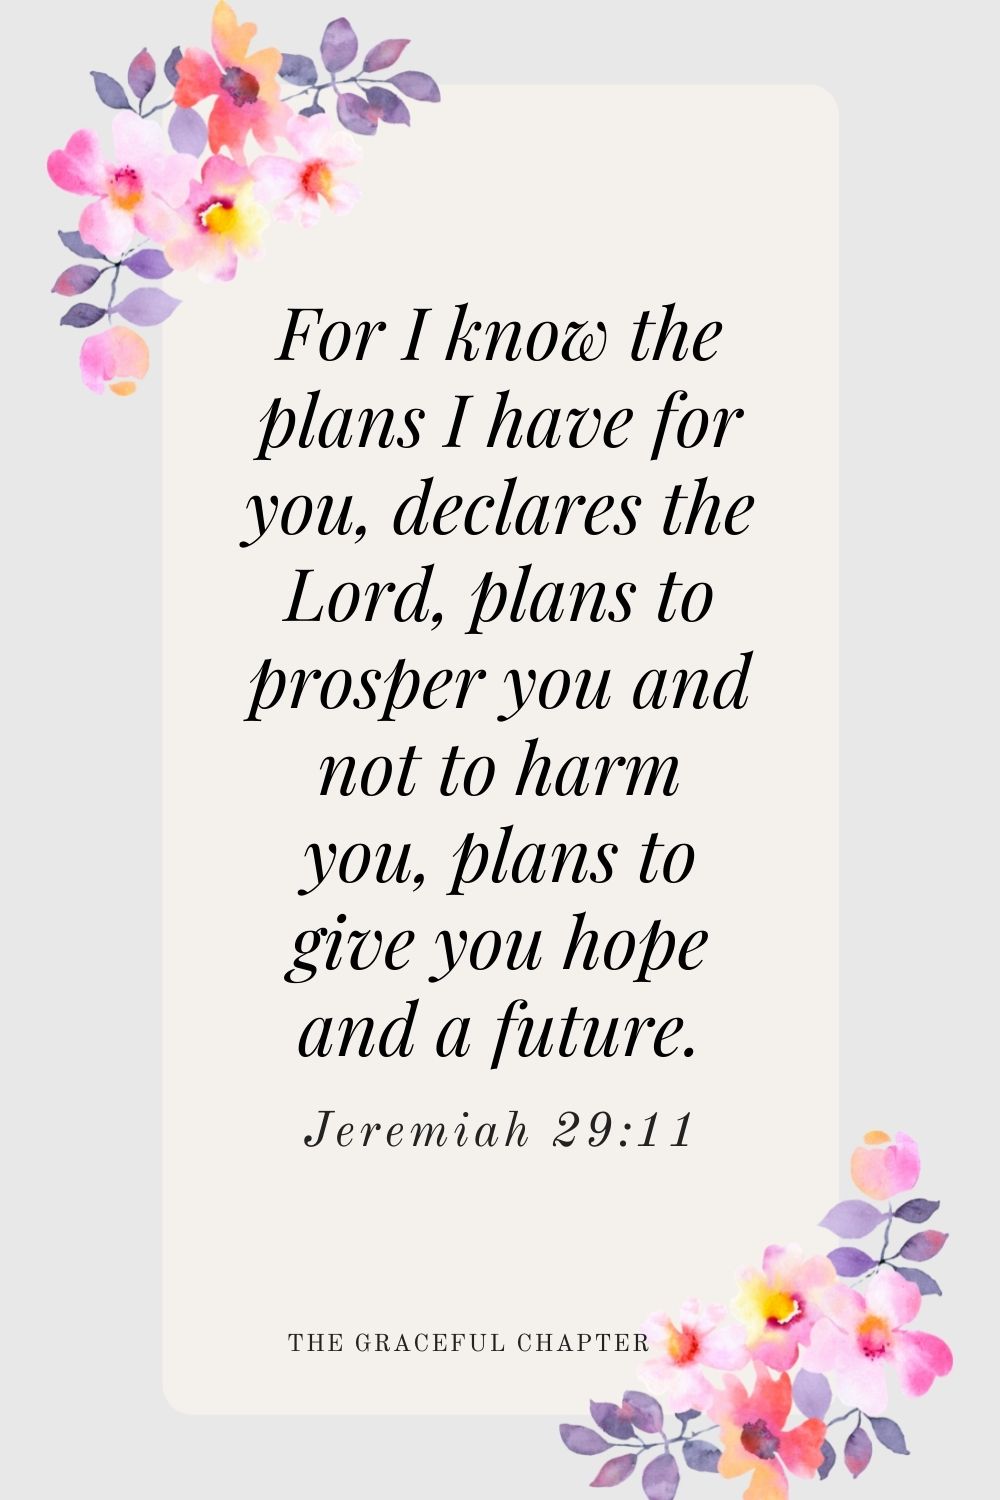 For I know the plans I have for you, declares the Lord, plans to prosper you and not to harm you, plans to give you hope and a future. Jeremiah 29:11